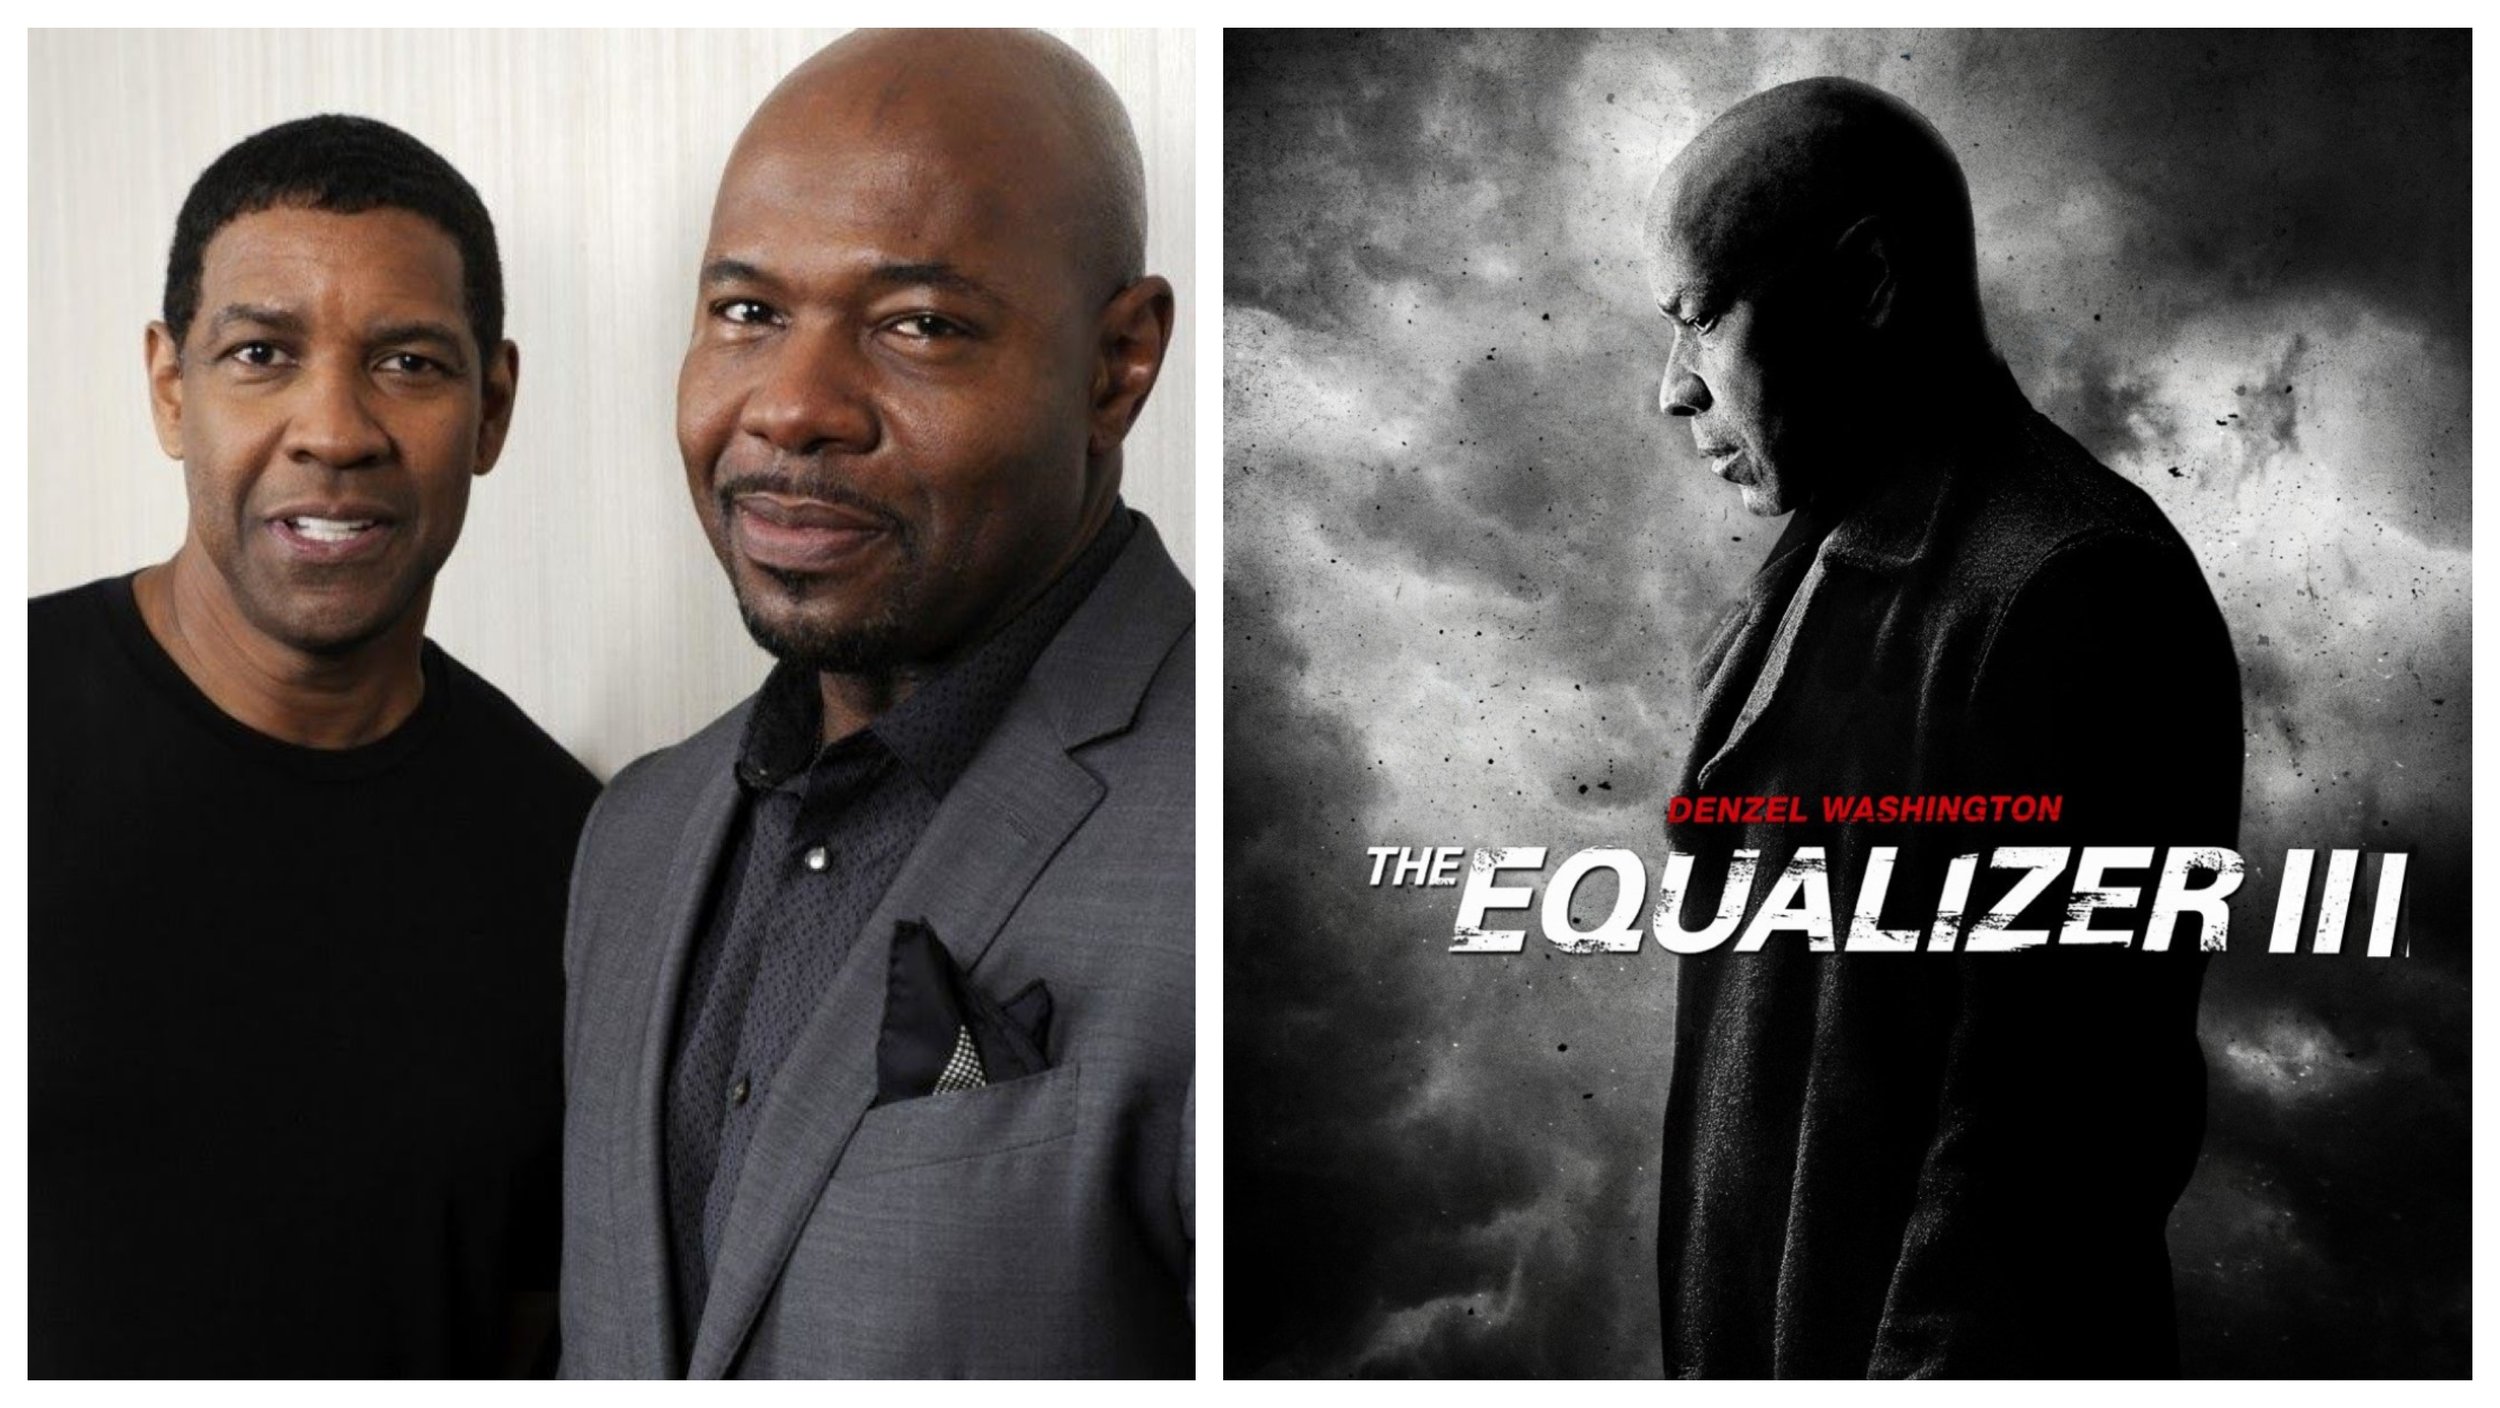 Equalizer 3' review: Denzel Washington reloads as the McCall to